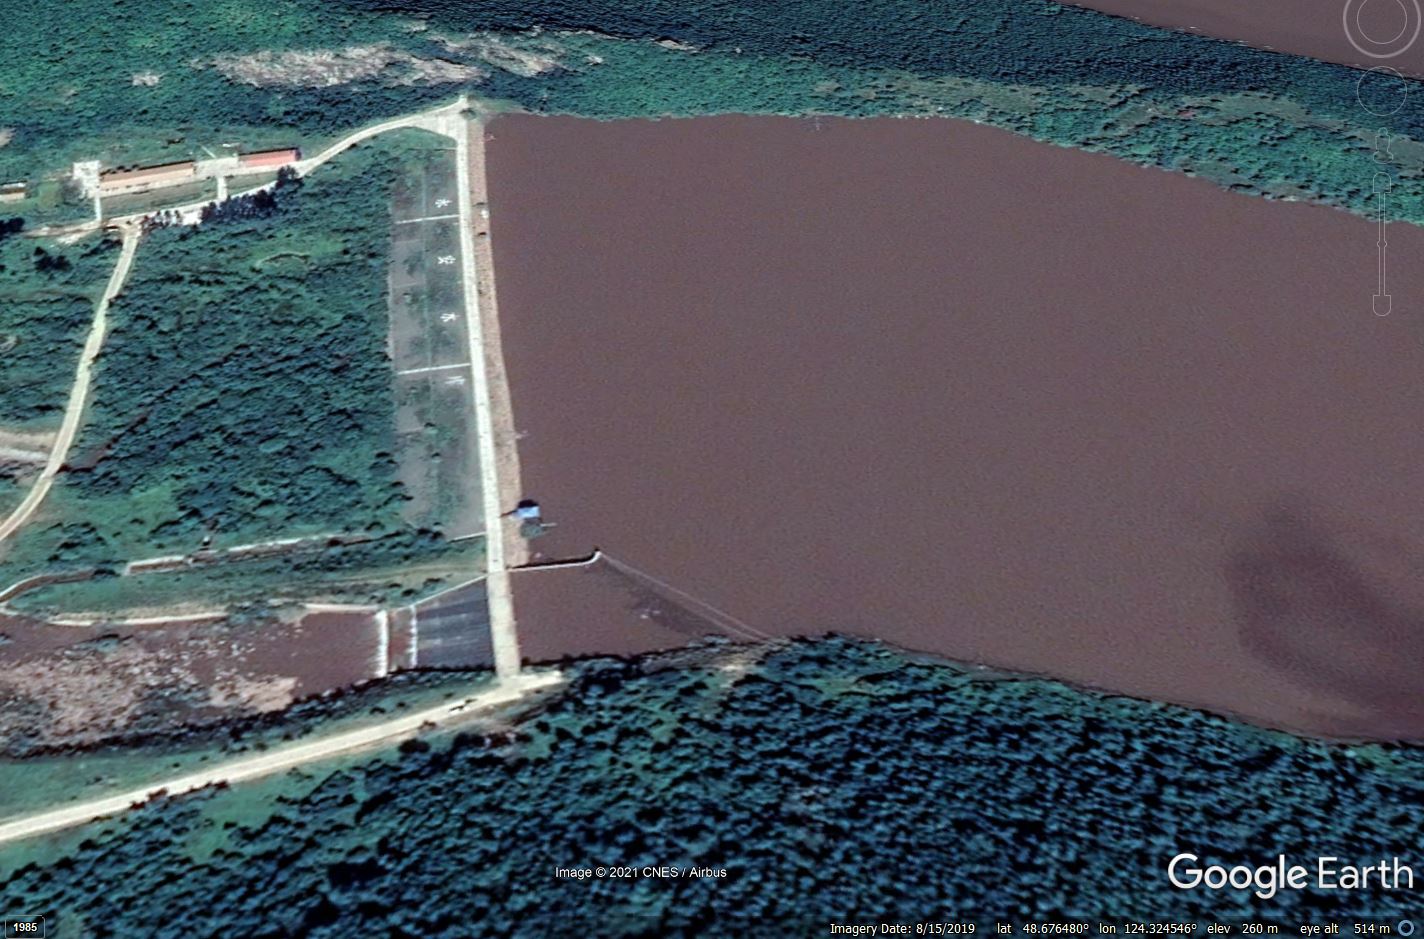 Google Earth image showing detail of the possible Yong'an Dam in Hulunbuir, China.